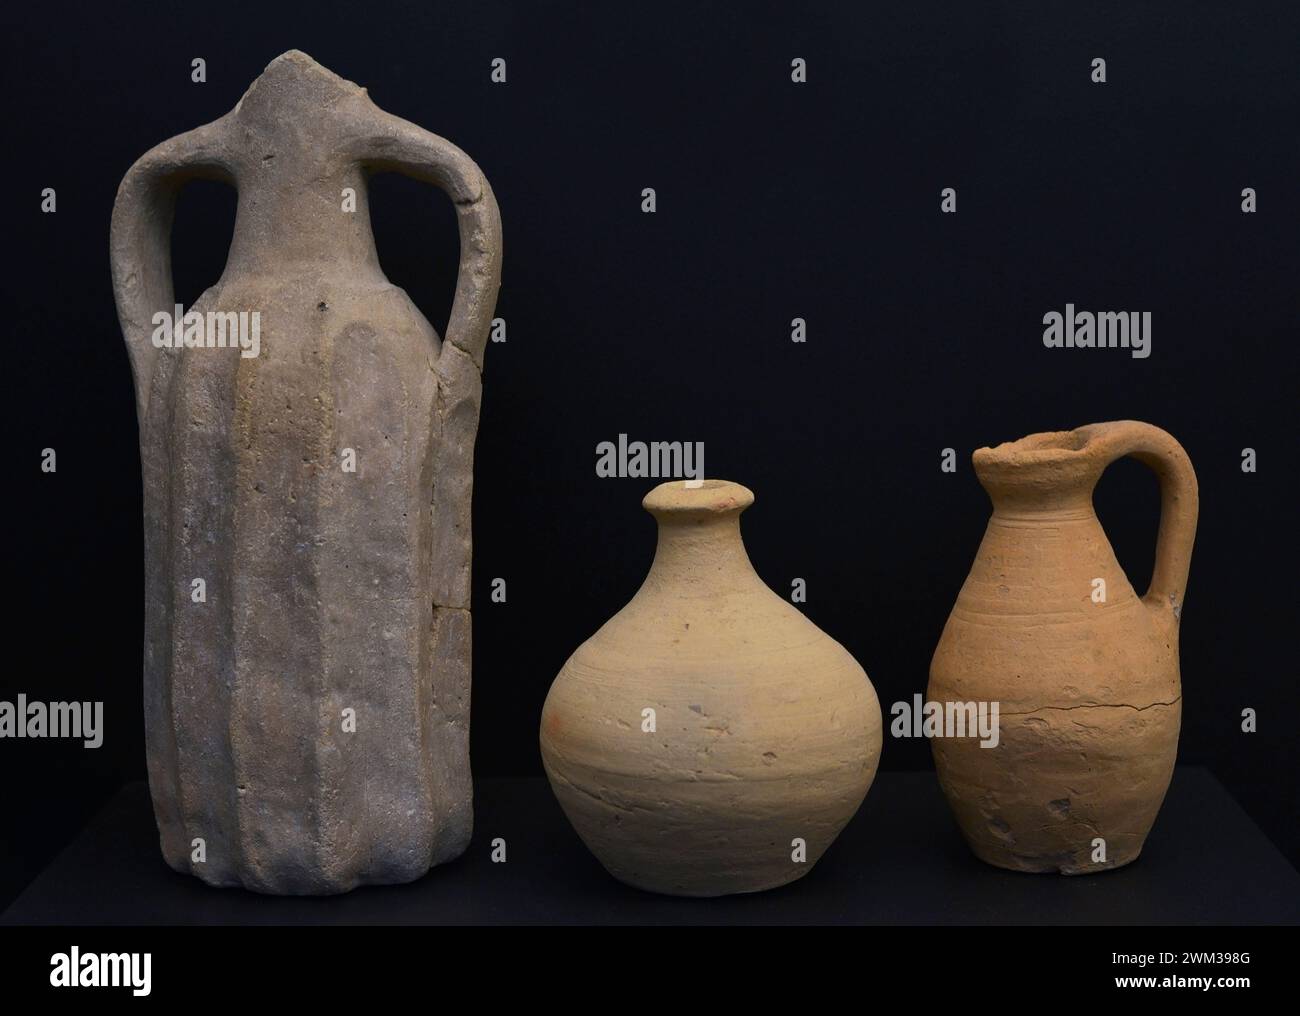 Pottery. From left to right: jug with cylindrical and ribbed body, 8th-9th centuries, from Toledo's Vega Baja archaeological site; globular-bodied bottle, 4th-5th centuries, from the Roman villa of Carranque (province of Toledo), bitronconical jug handled, 7th century, unknown provenance. Museum of Visigoth Councils and Culture. Toledo, Castile-La Mancha, Spain. Stock Photo